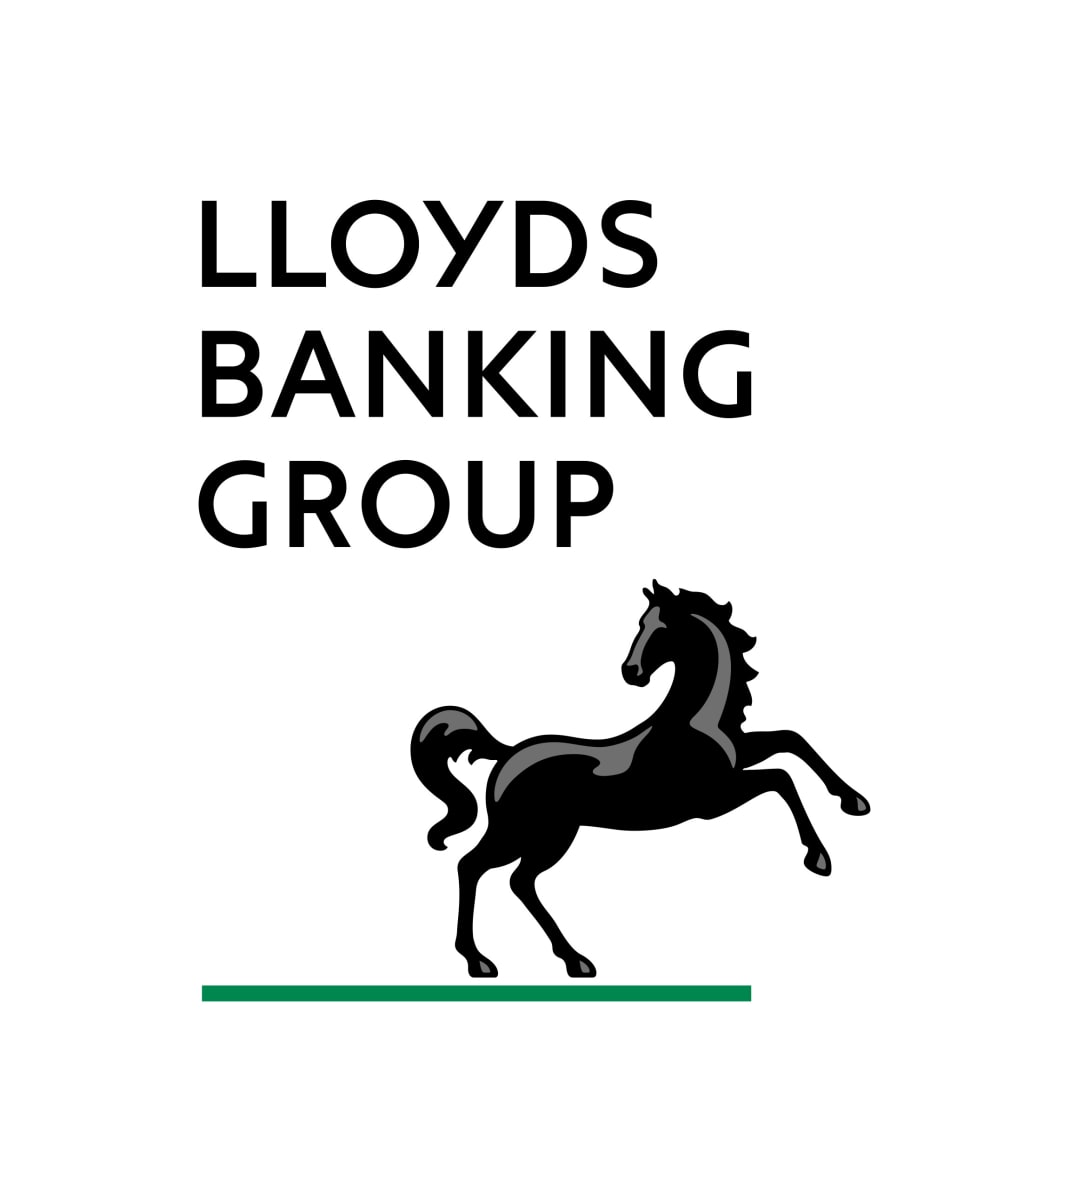 Lloyds Banking Group Looking For Digital Currency Manager, Faces Decisive Choice